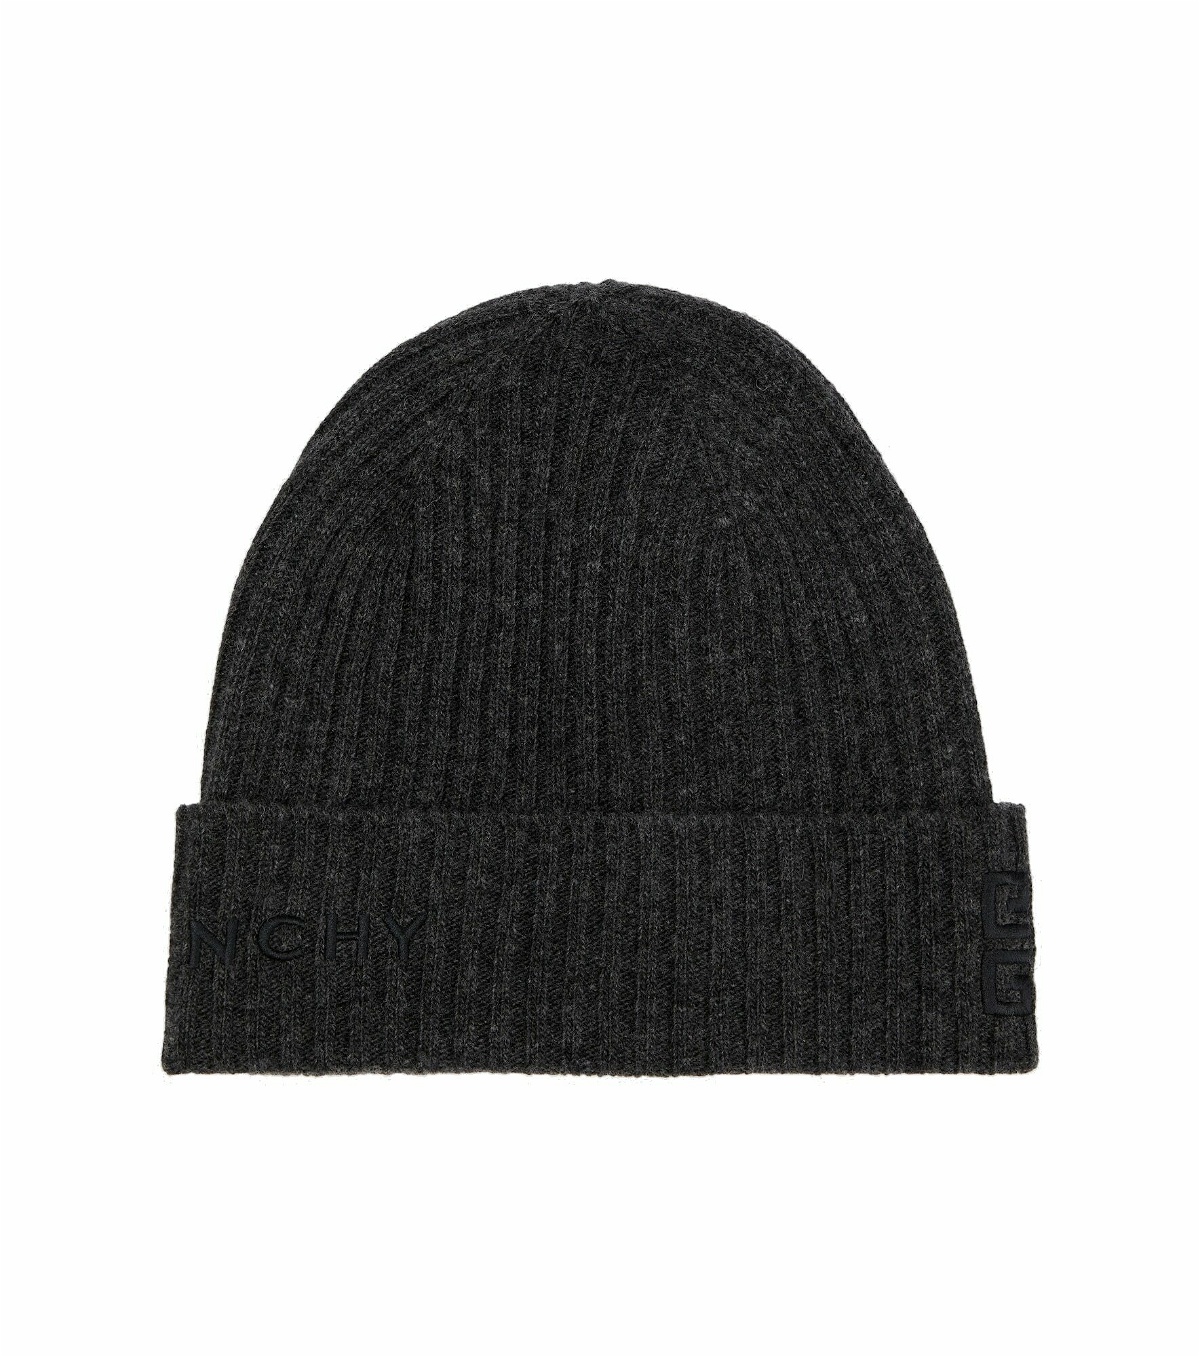 Givenchy - Wool and cashmere beanie Givenchy